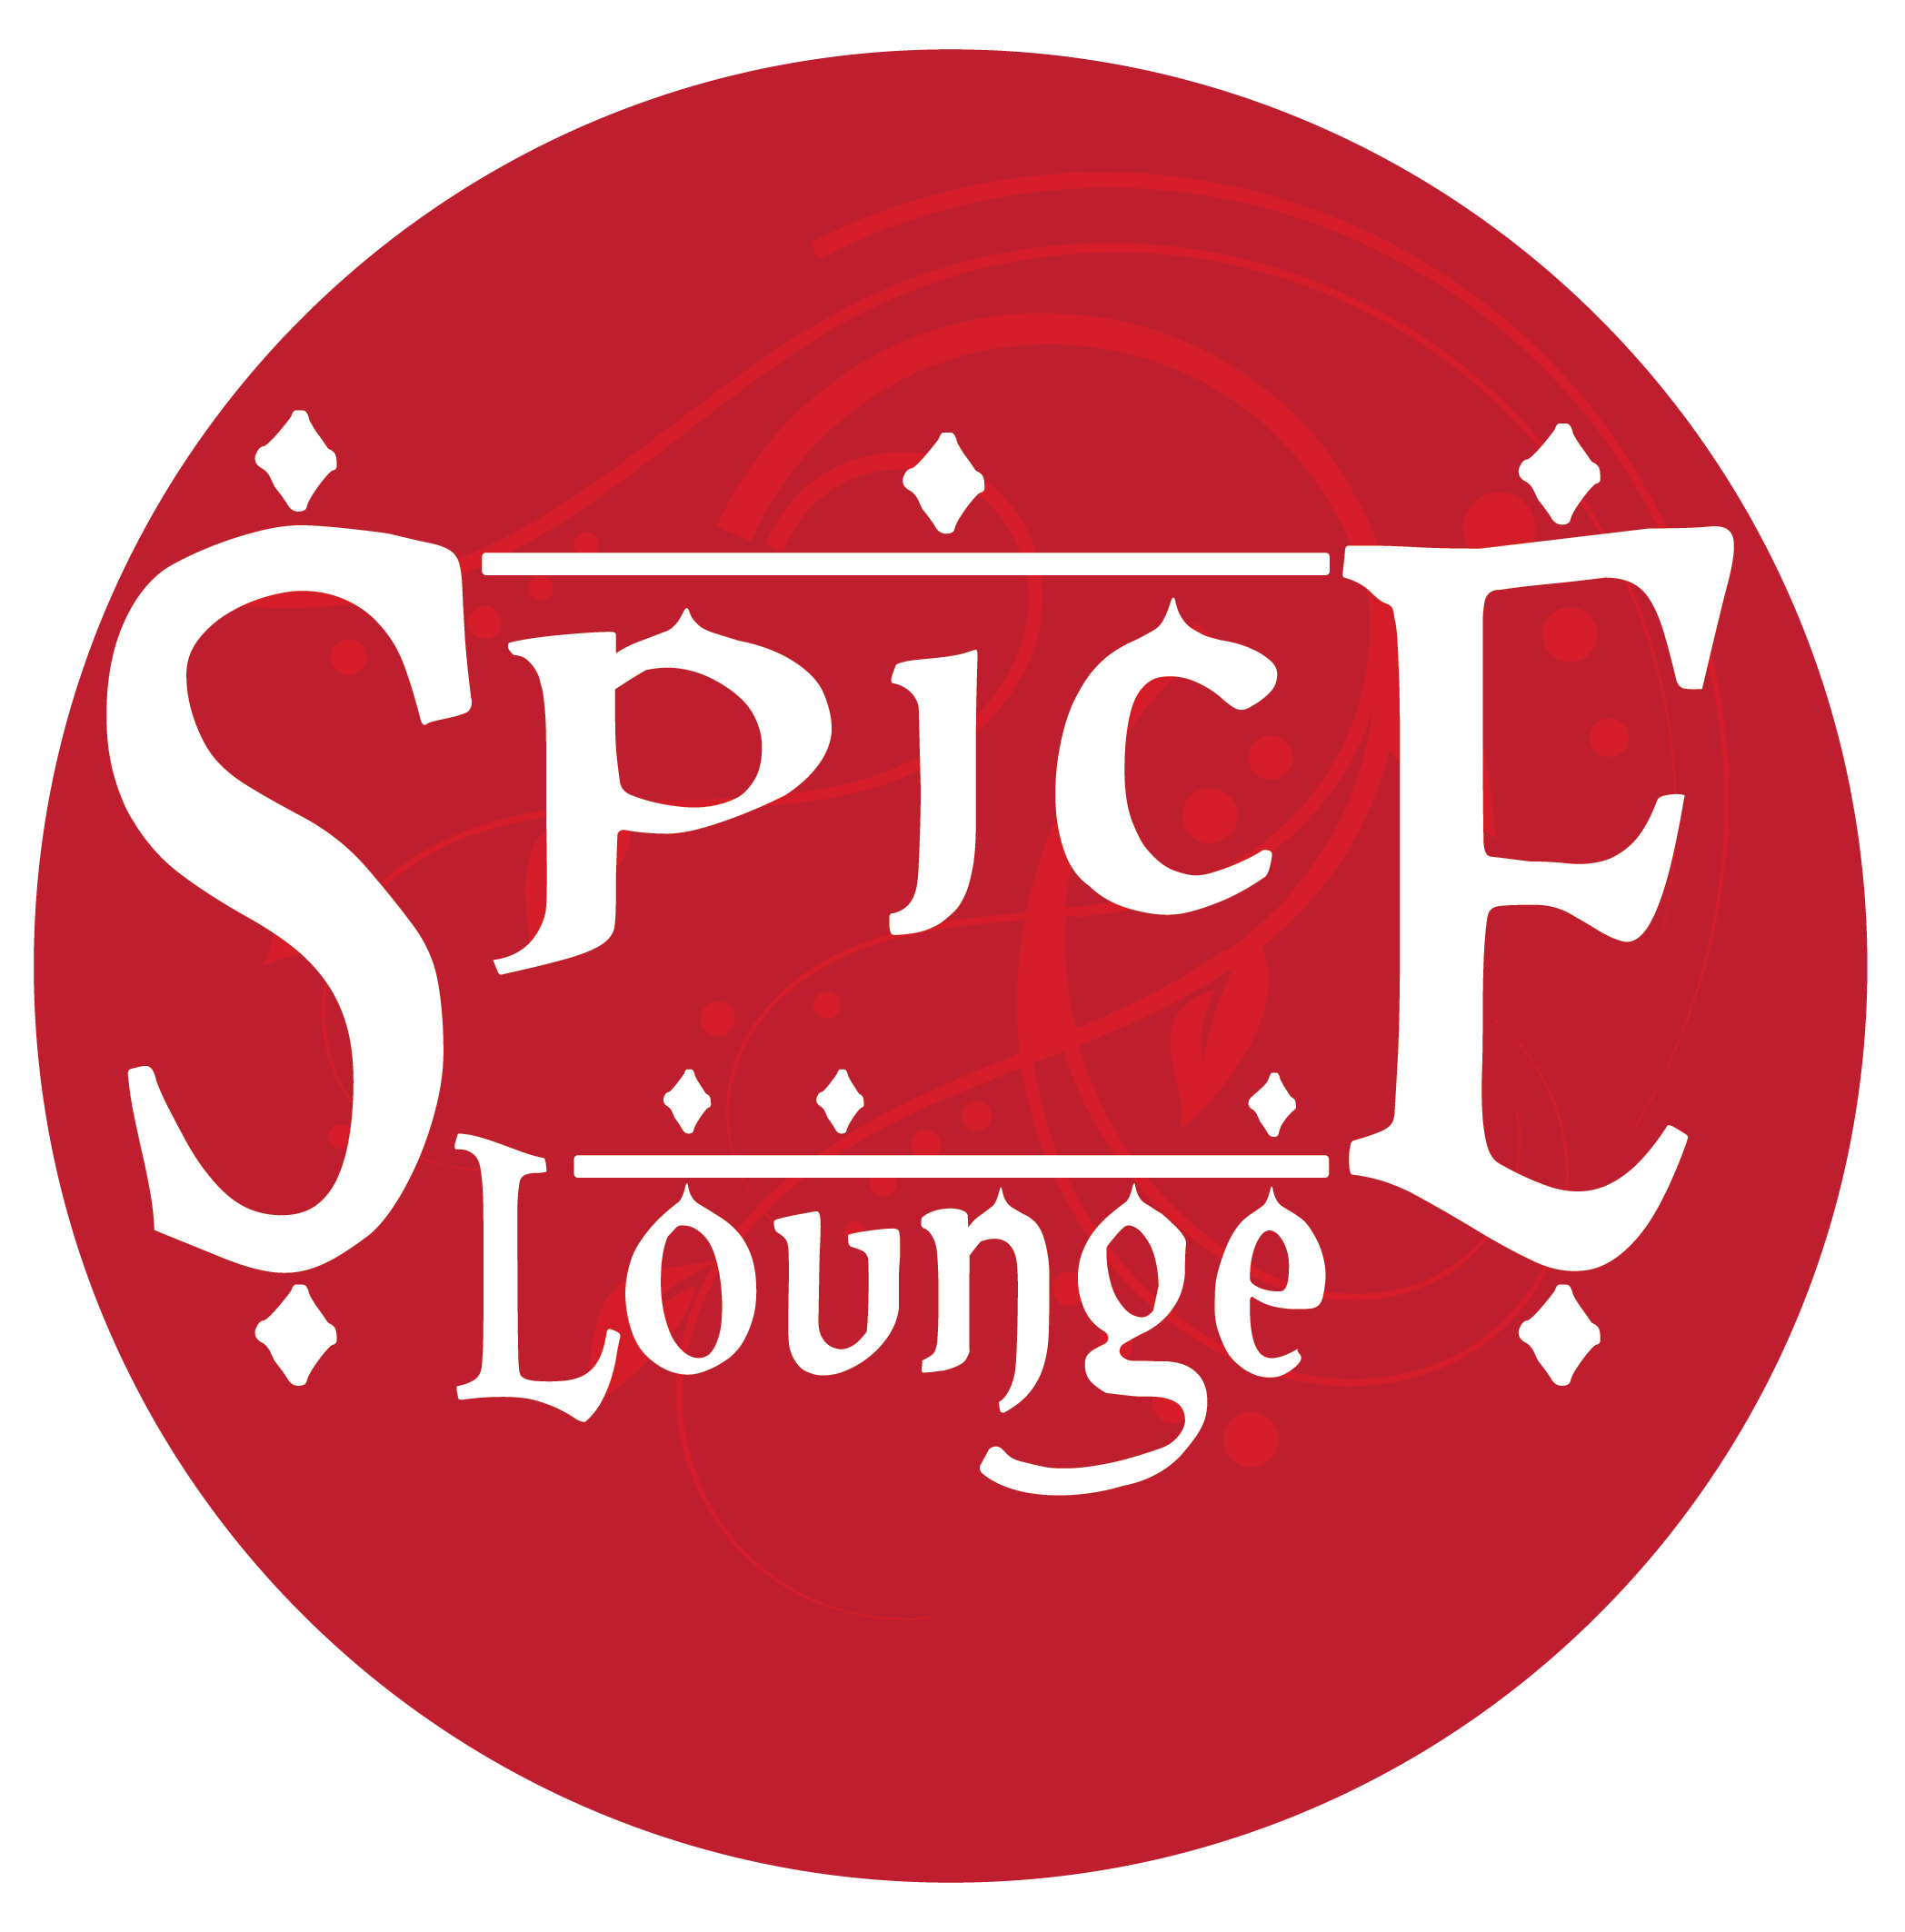 Round Red Restaurant Logo - Spice Lounge | Indian Restaurant and Catering